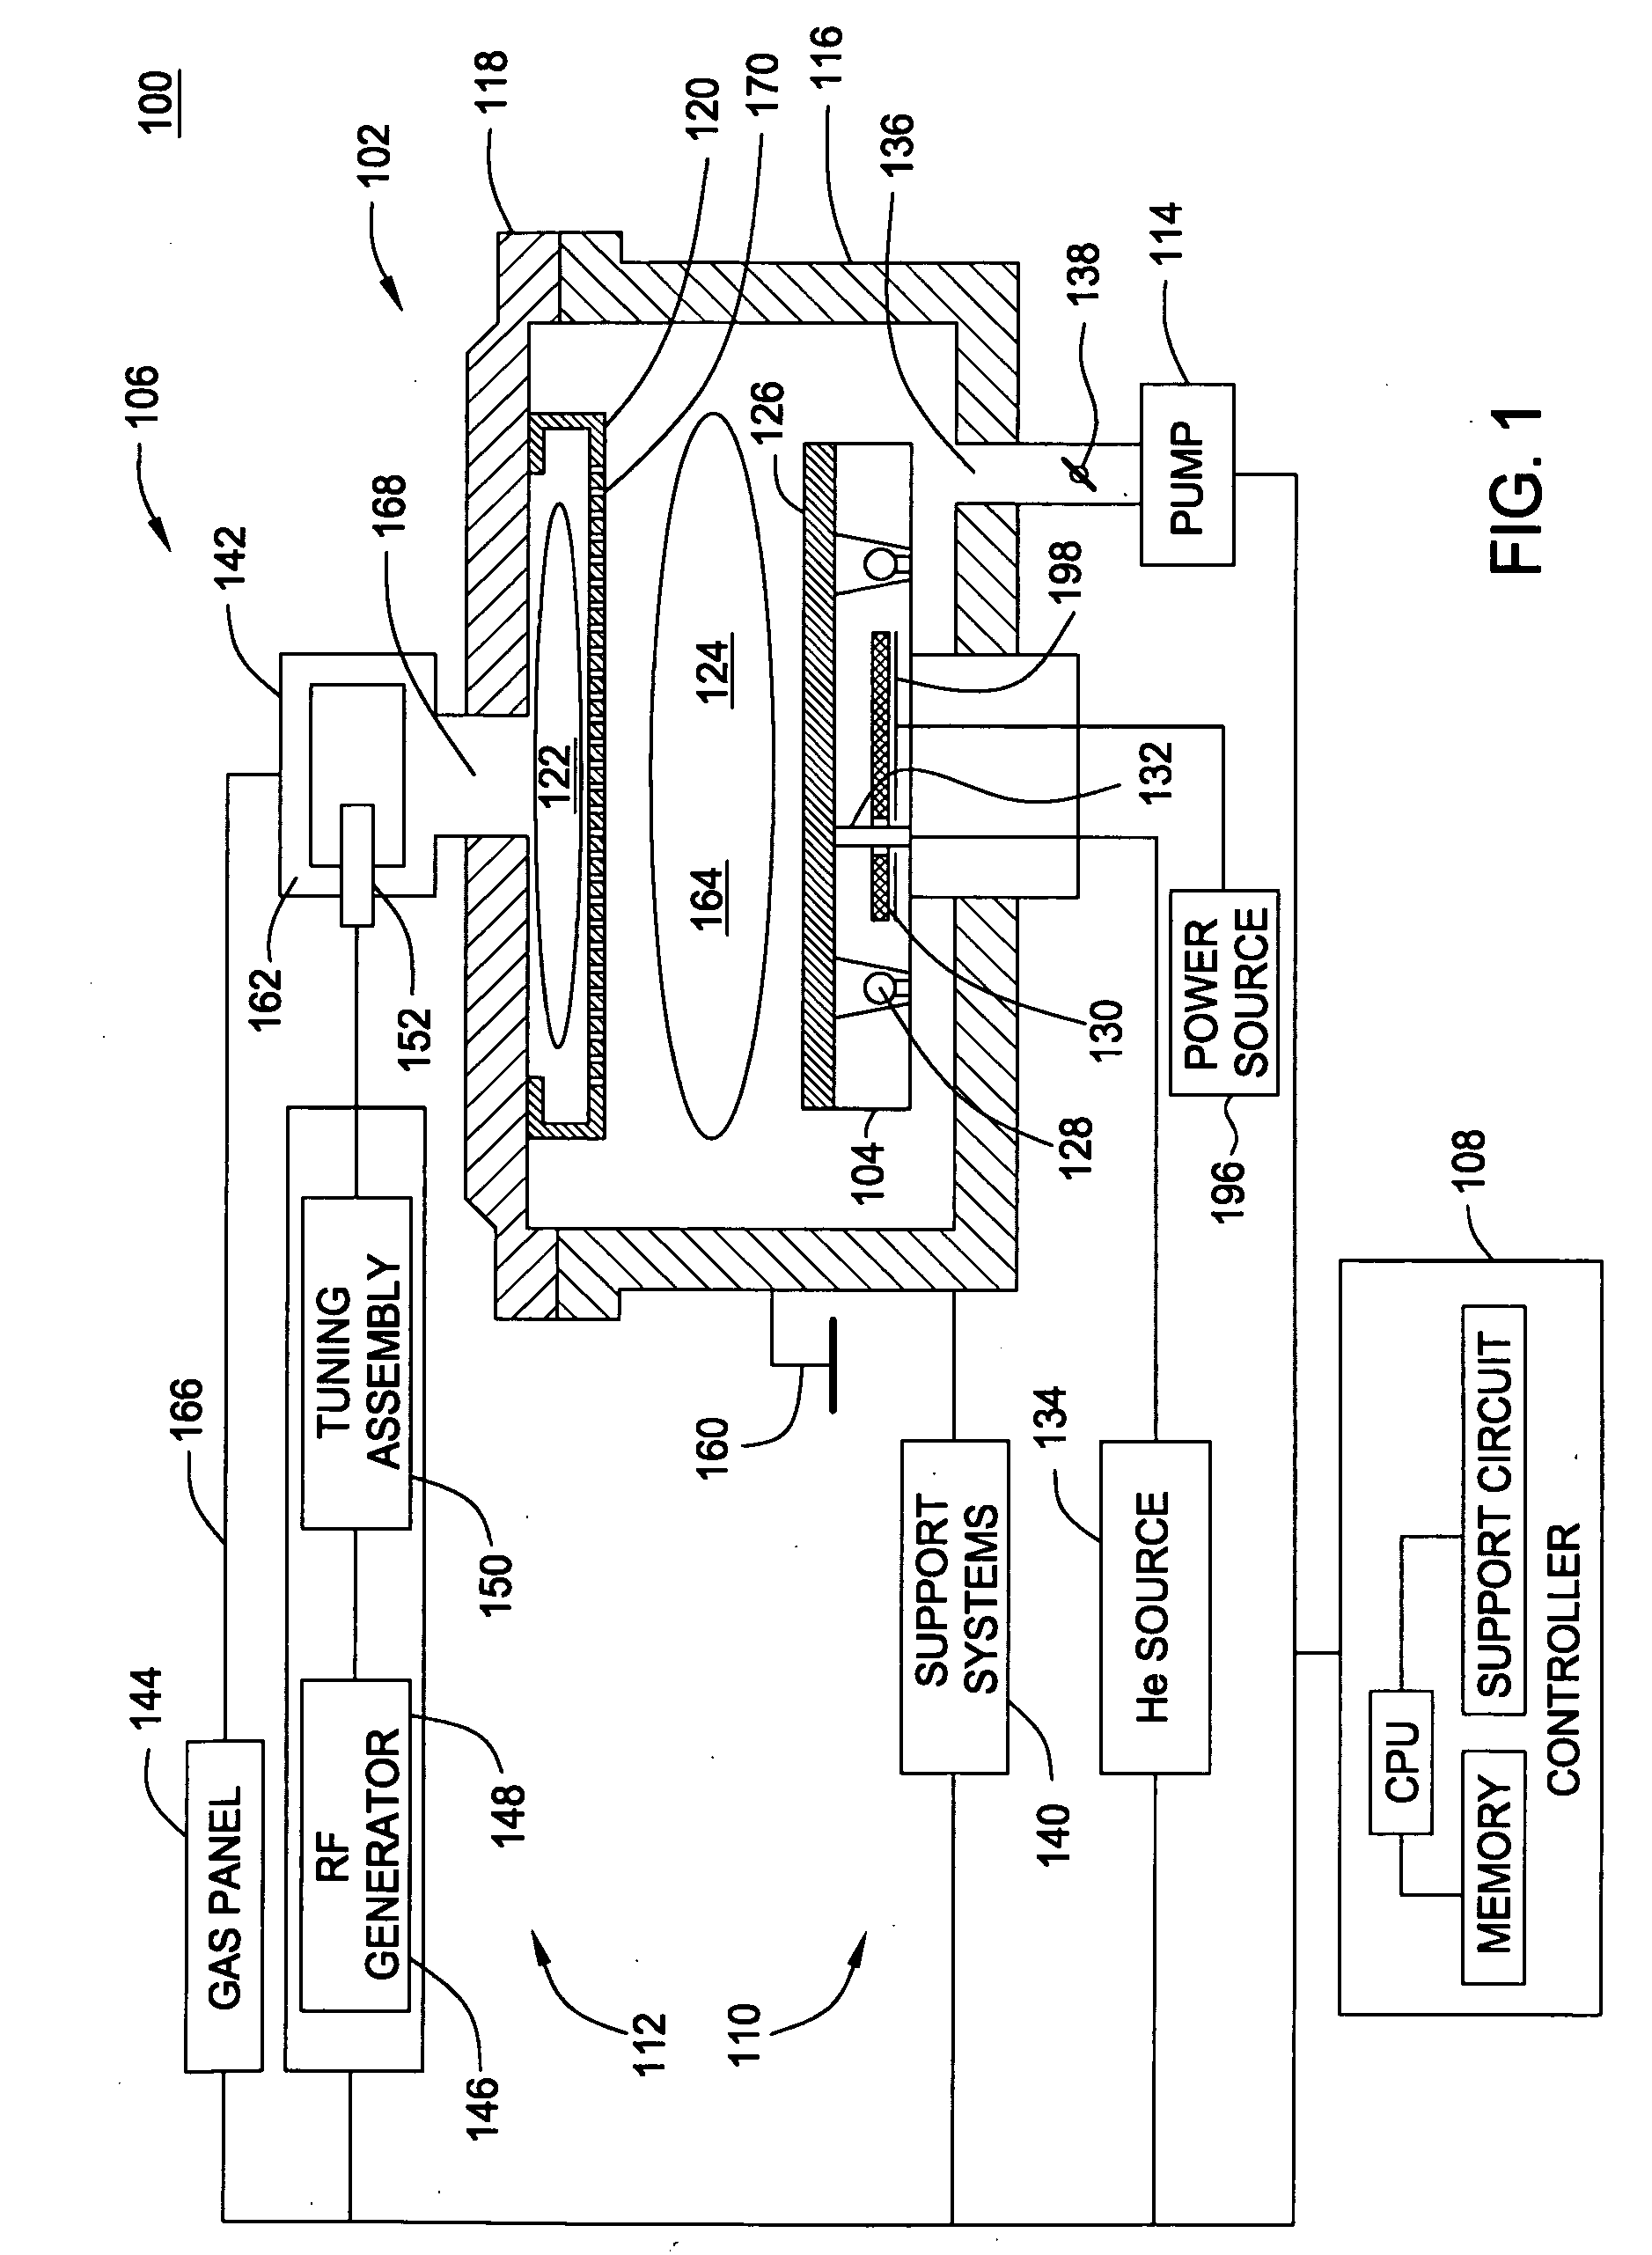 Dry photoresist stripping process and apparatus